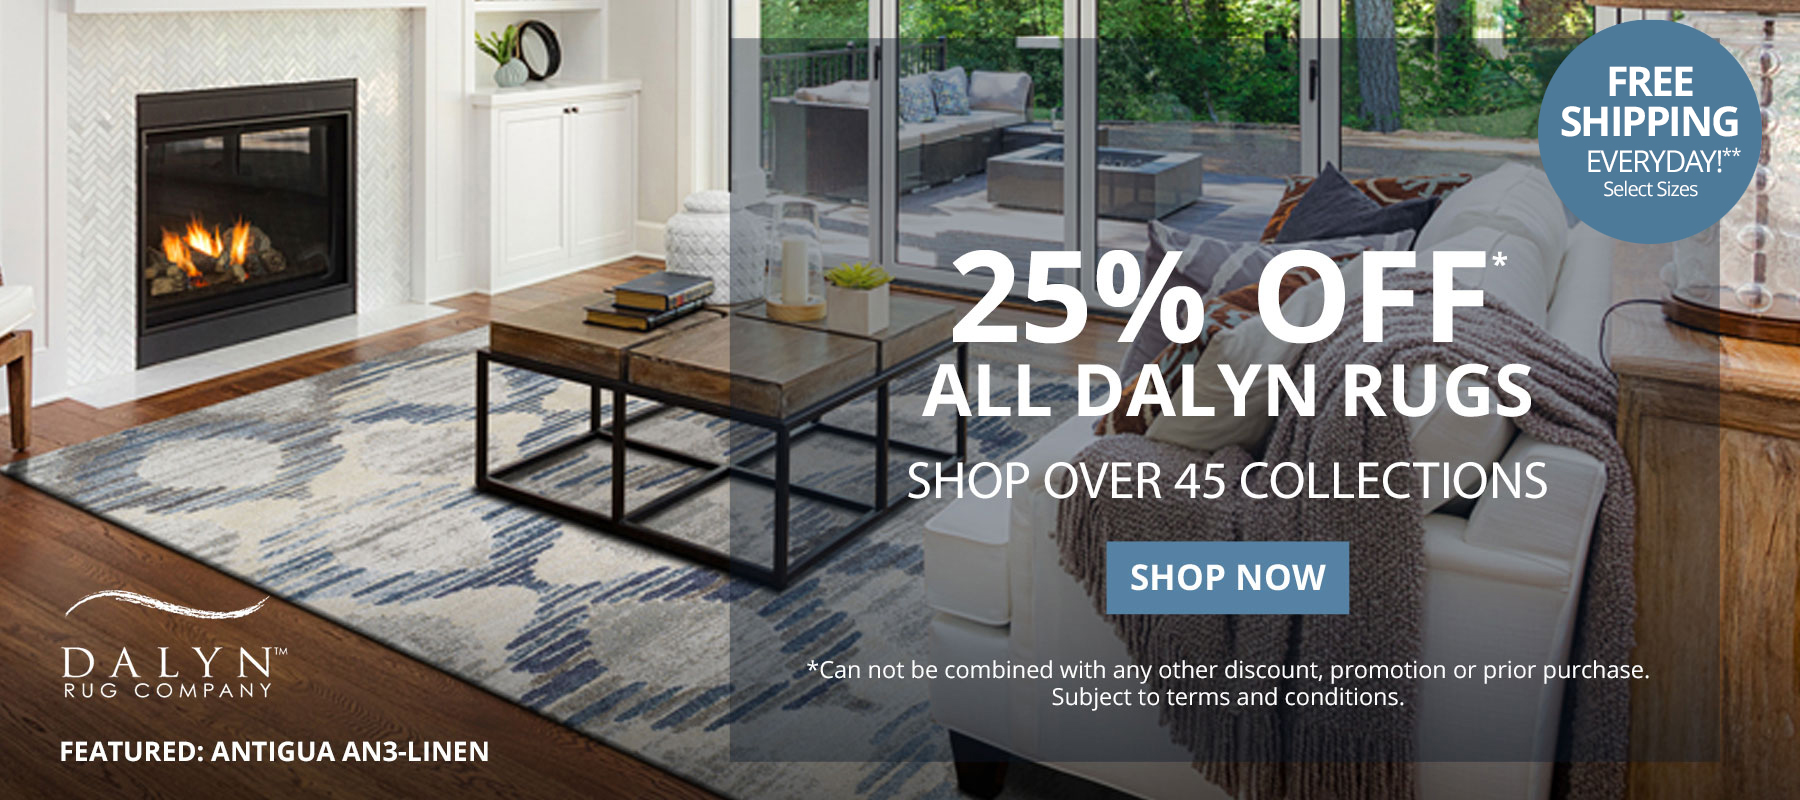 25% Off* All Dalyn Rugs. Shop Over 45 Collections. Free Shipping Everyday!** Select Sizes. *Can not be combined with any other discount, promotion or prior purchase. Subject to terms and conditions. Shop Now.